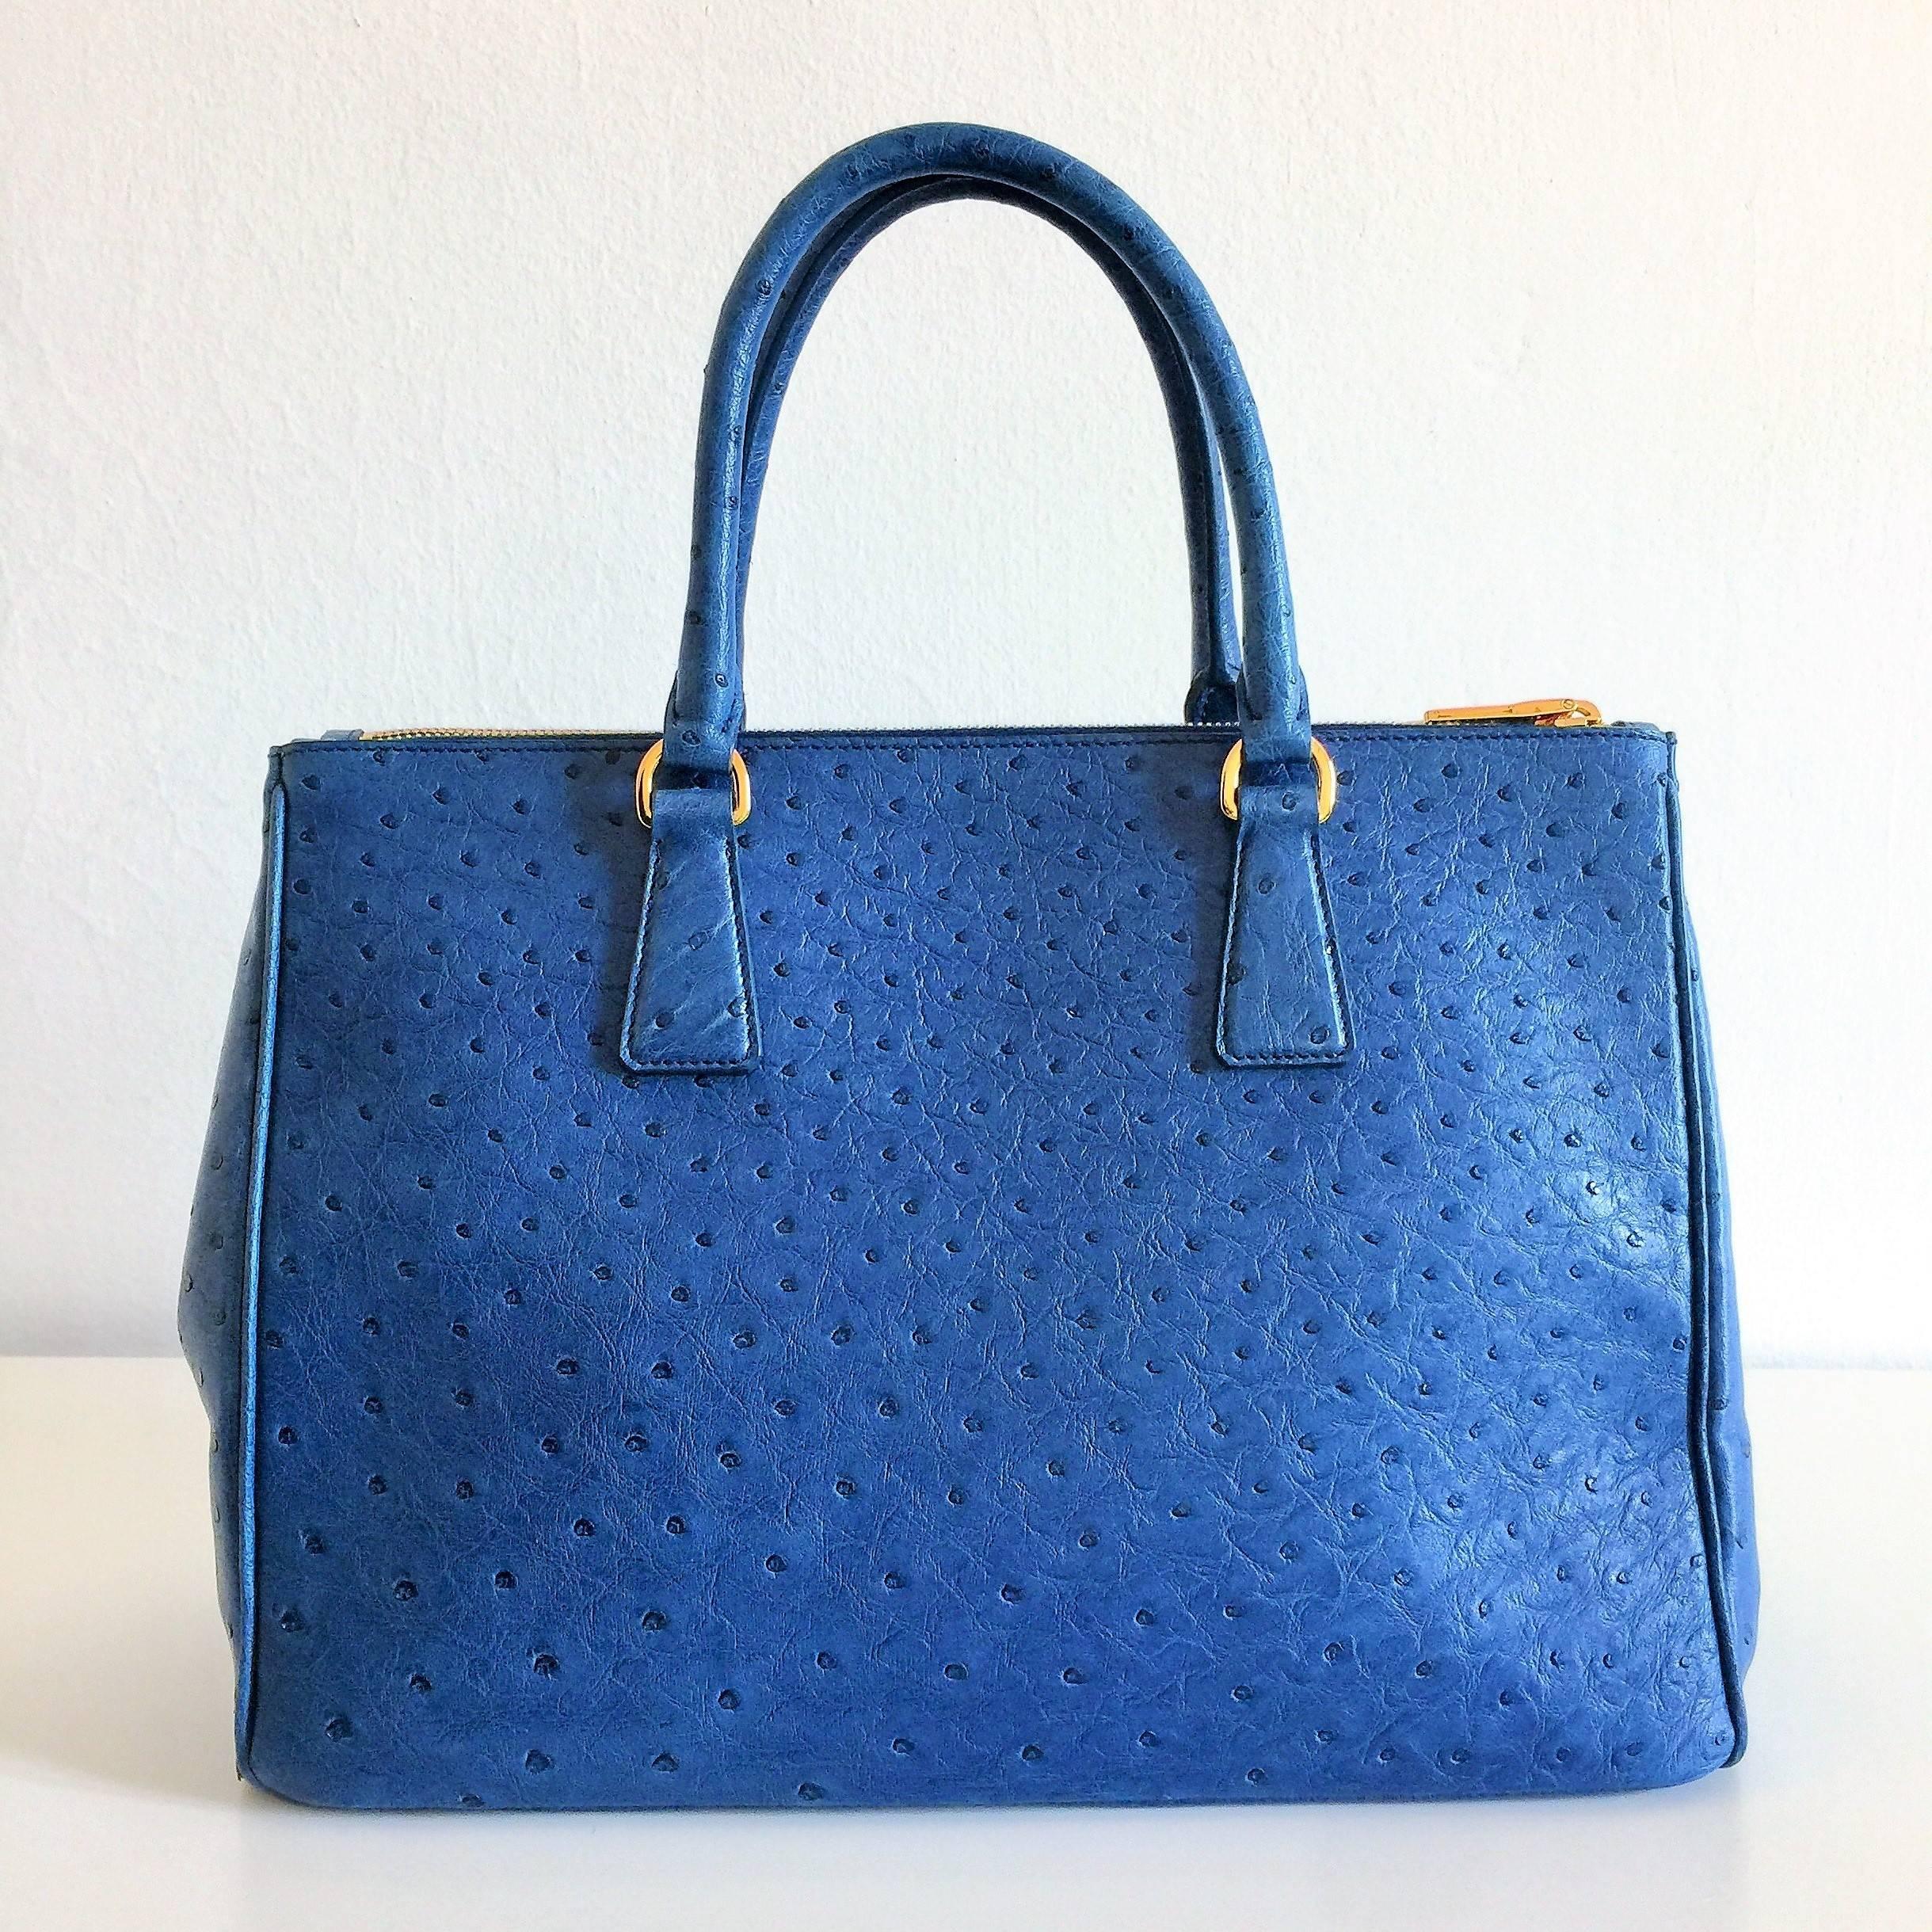 This is a pristine Prada bag made in a marvellous cobalt-blue ostrich leather the bag has been worn once in its life so it's in pristine condition. This double zip tote comes with its complete set of original accessories: shoulder strap, dustbag,